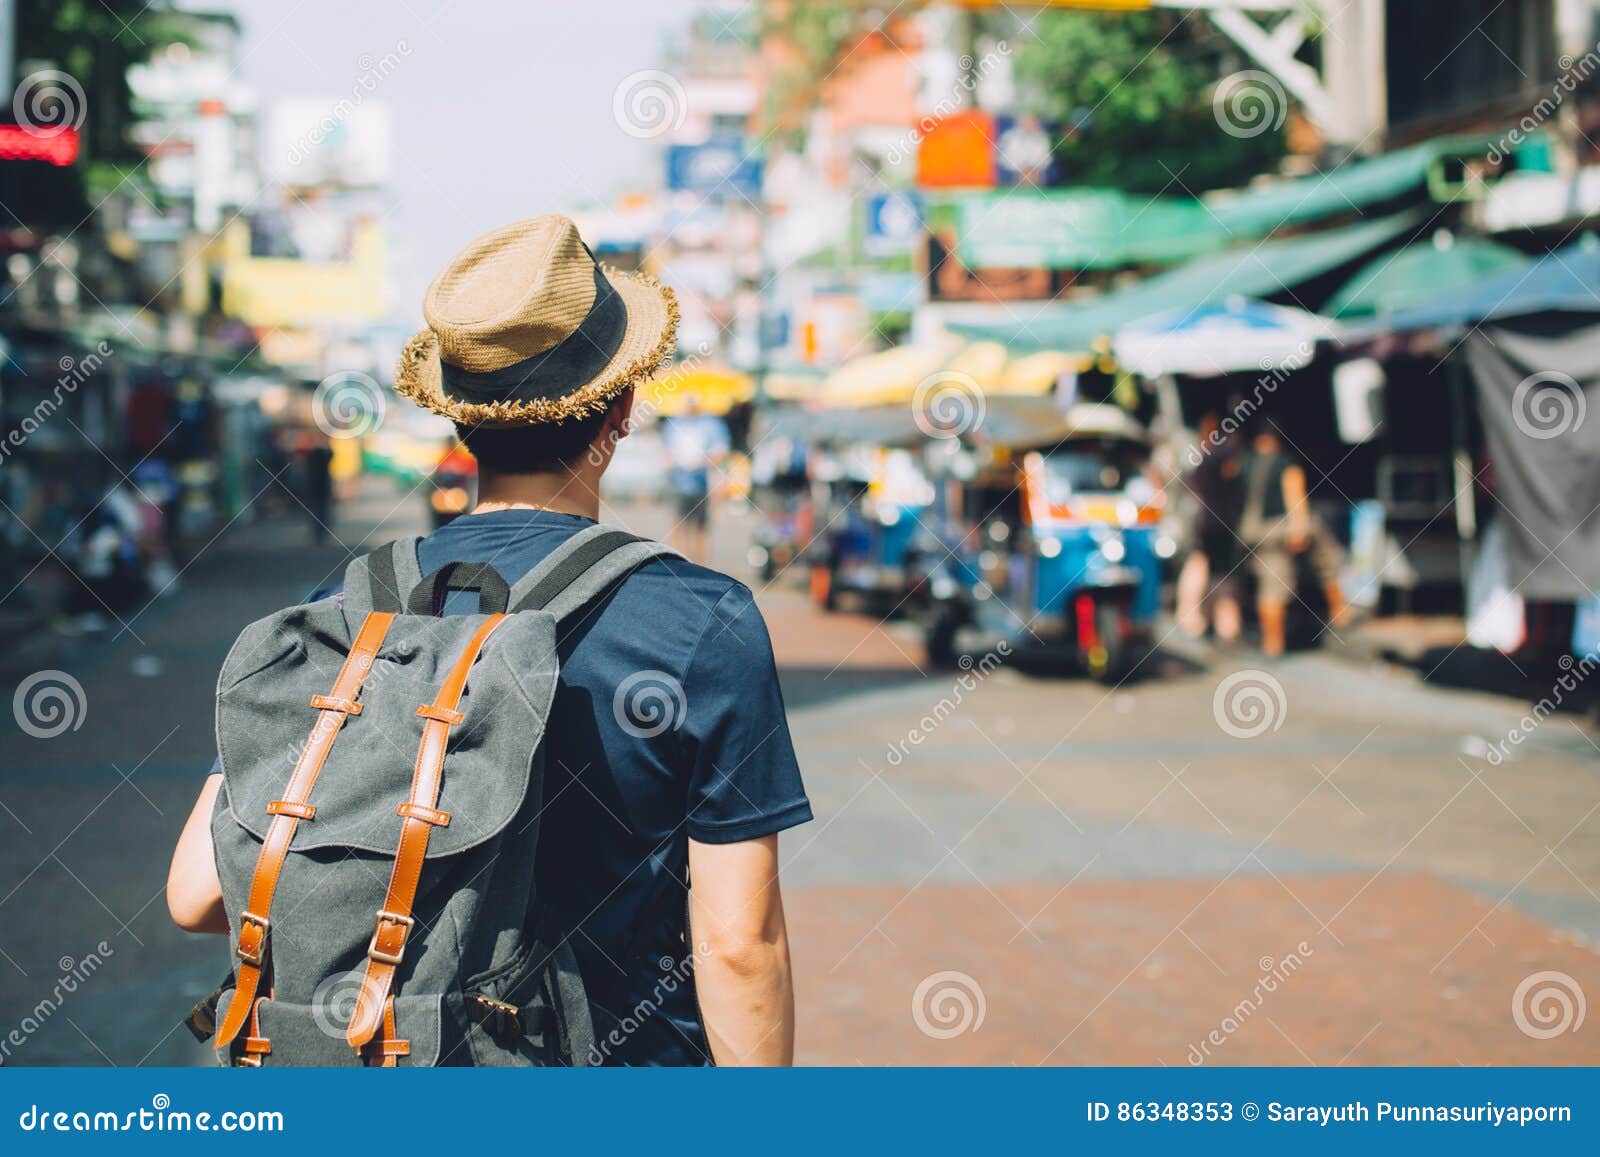 young asian traveling backpacker in khaosan road outdoor market